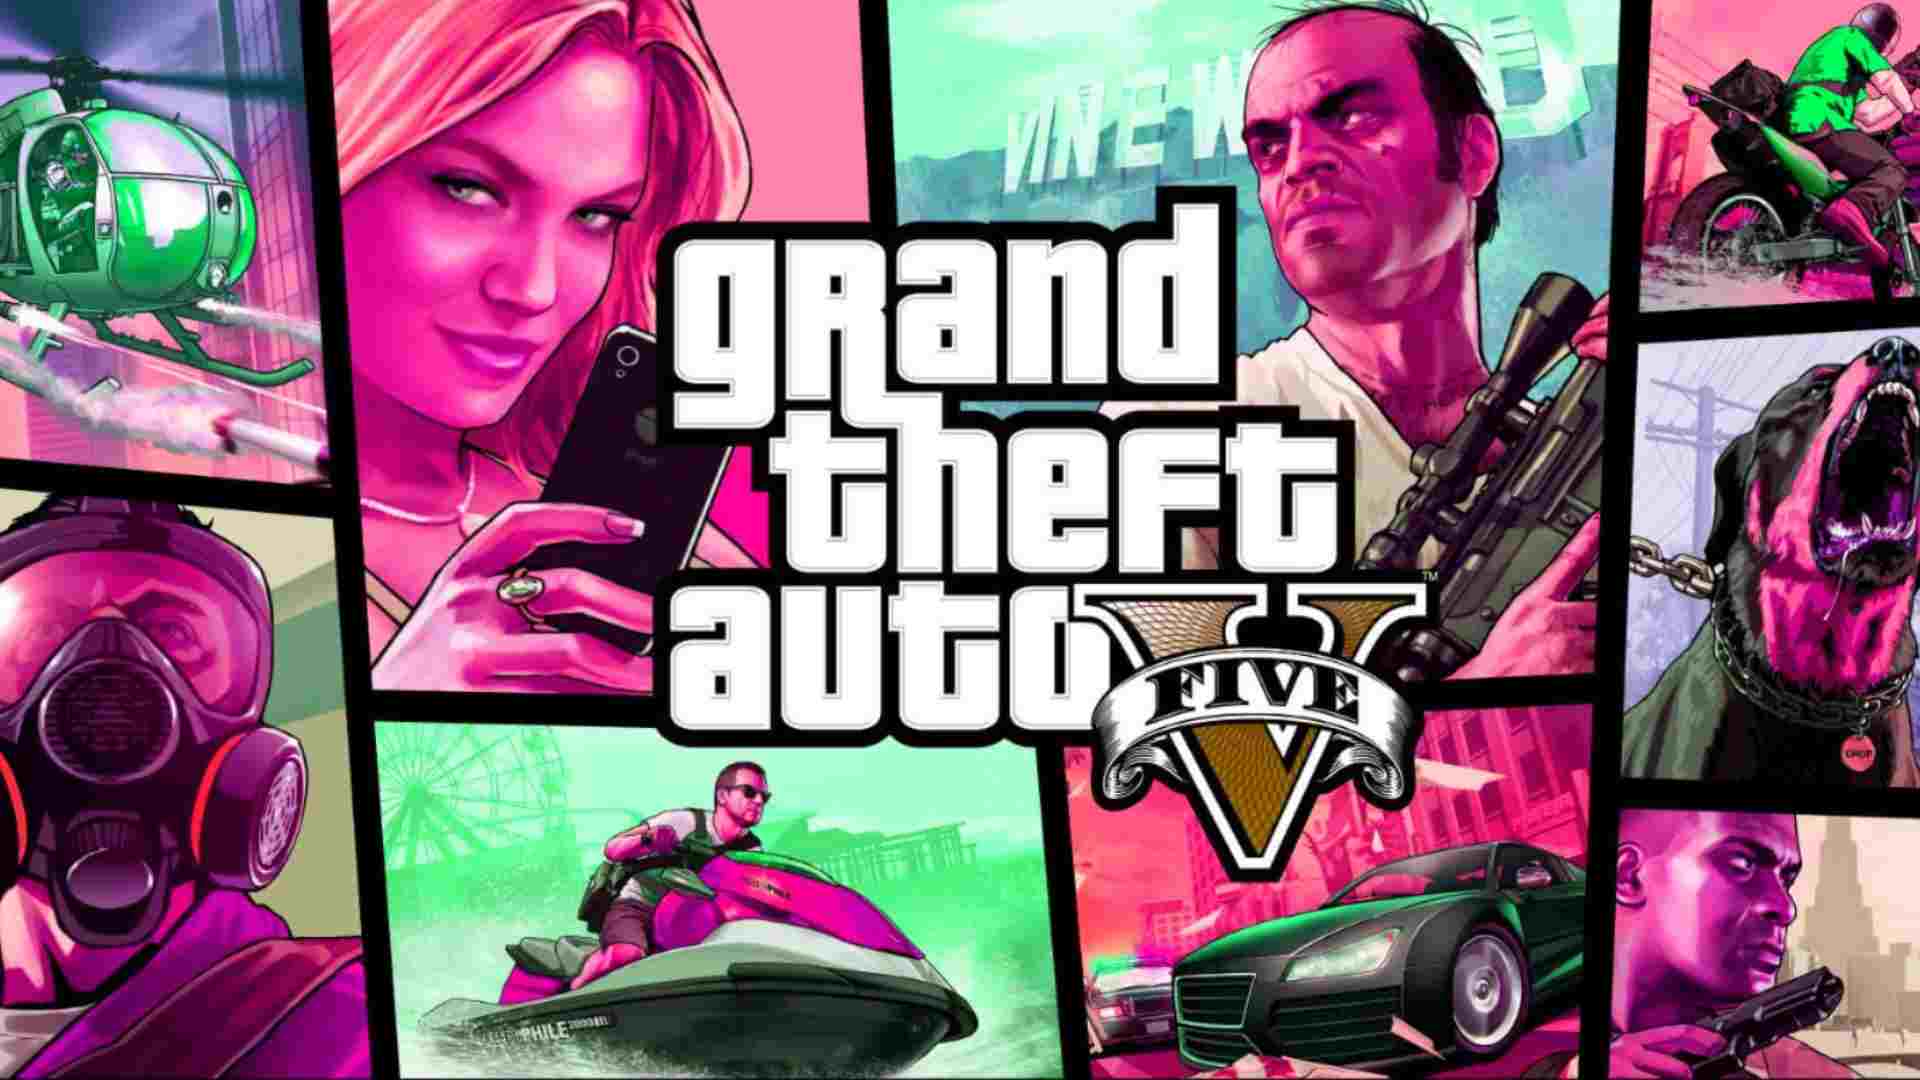 Grand Theft Auto V Age Rating and parents guide | 2022Grand Theft Auto V Age Rating and parents guide | 2022Grand Theft Auto V Age Rating and parents guide | 2022